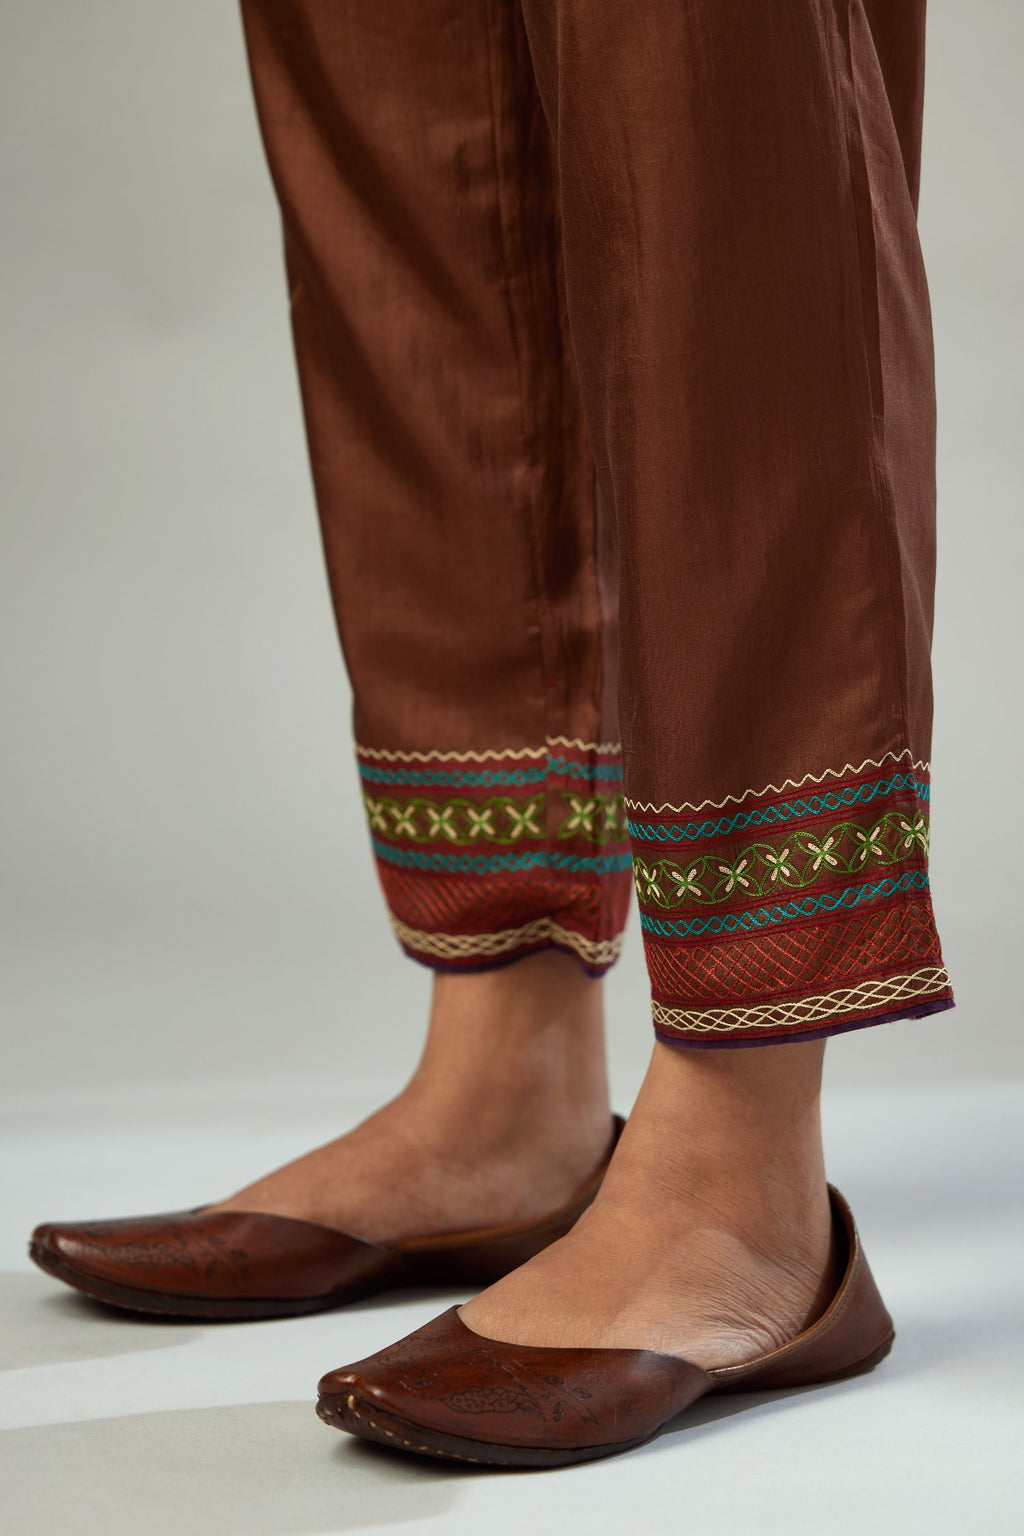 Brown silk straight pants detailed with quilted multi colored embroidery at bottom.